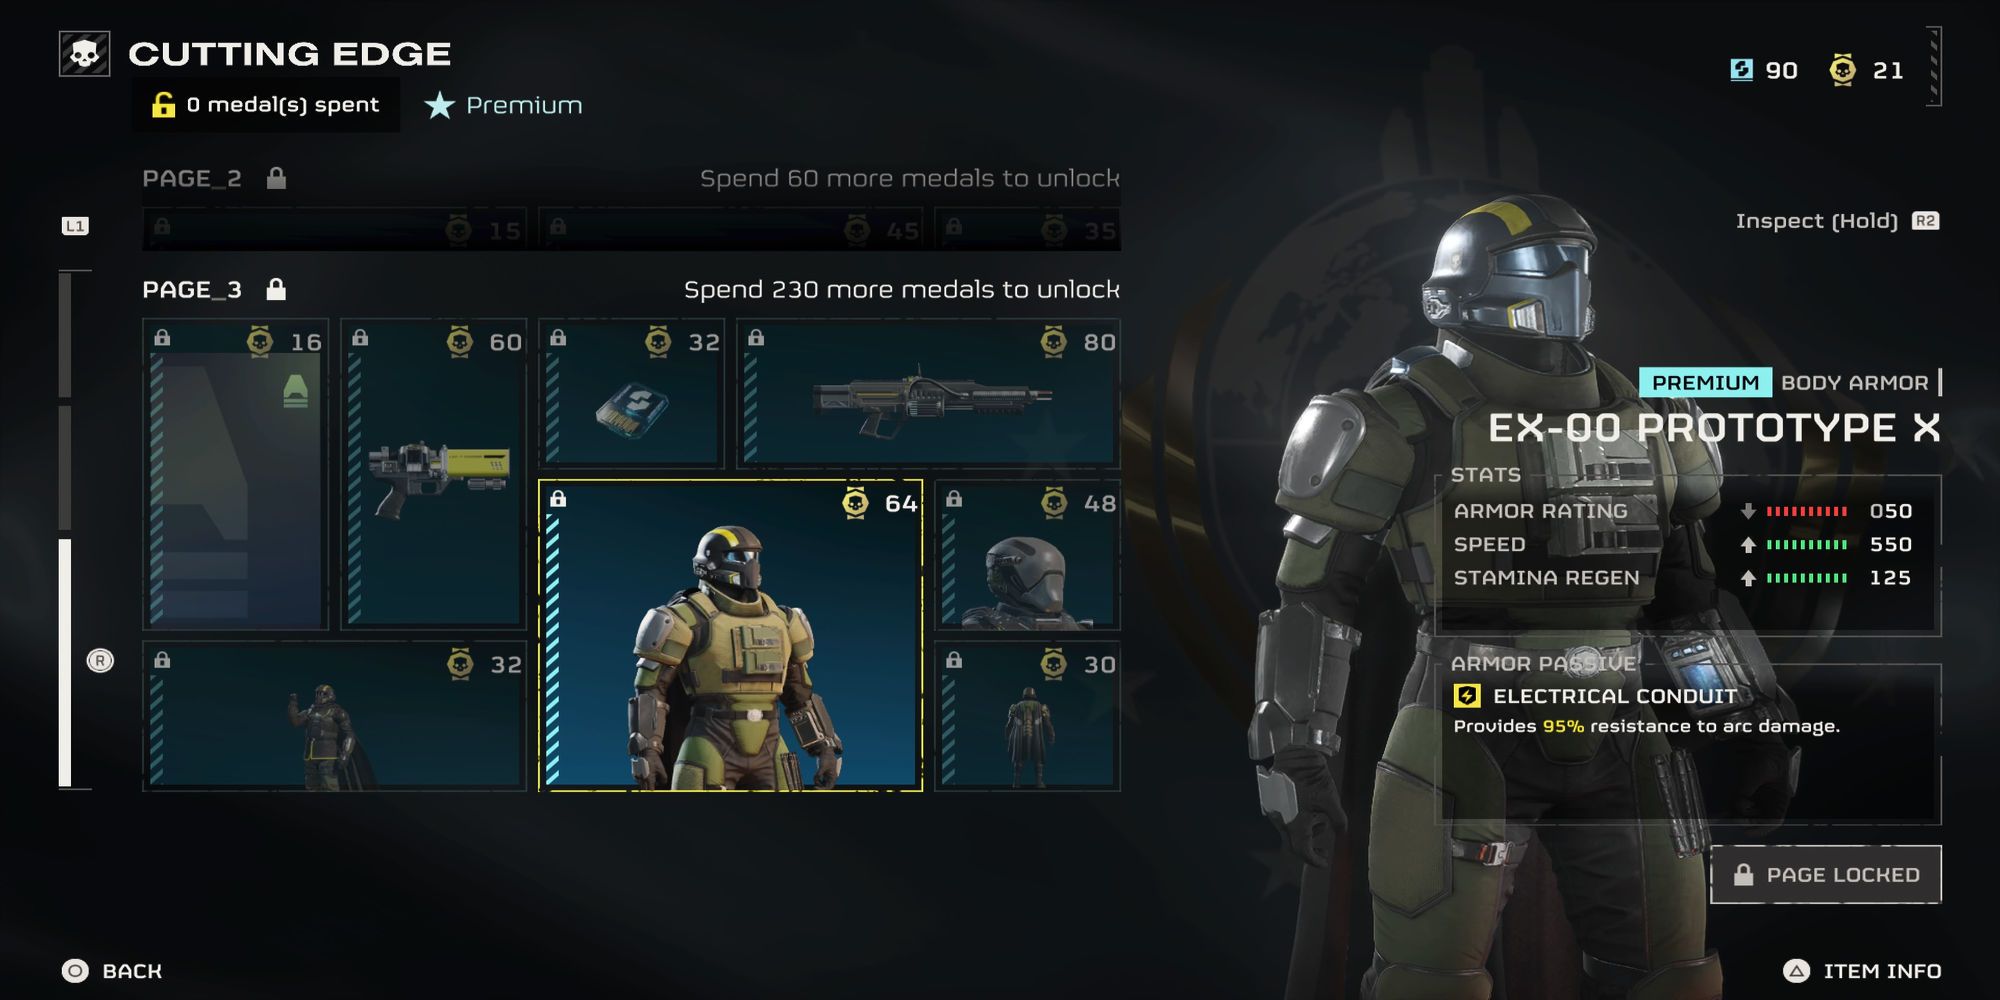 Stats for the Prototype X Armor in Helldivers 2